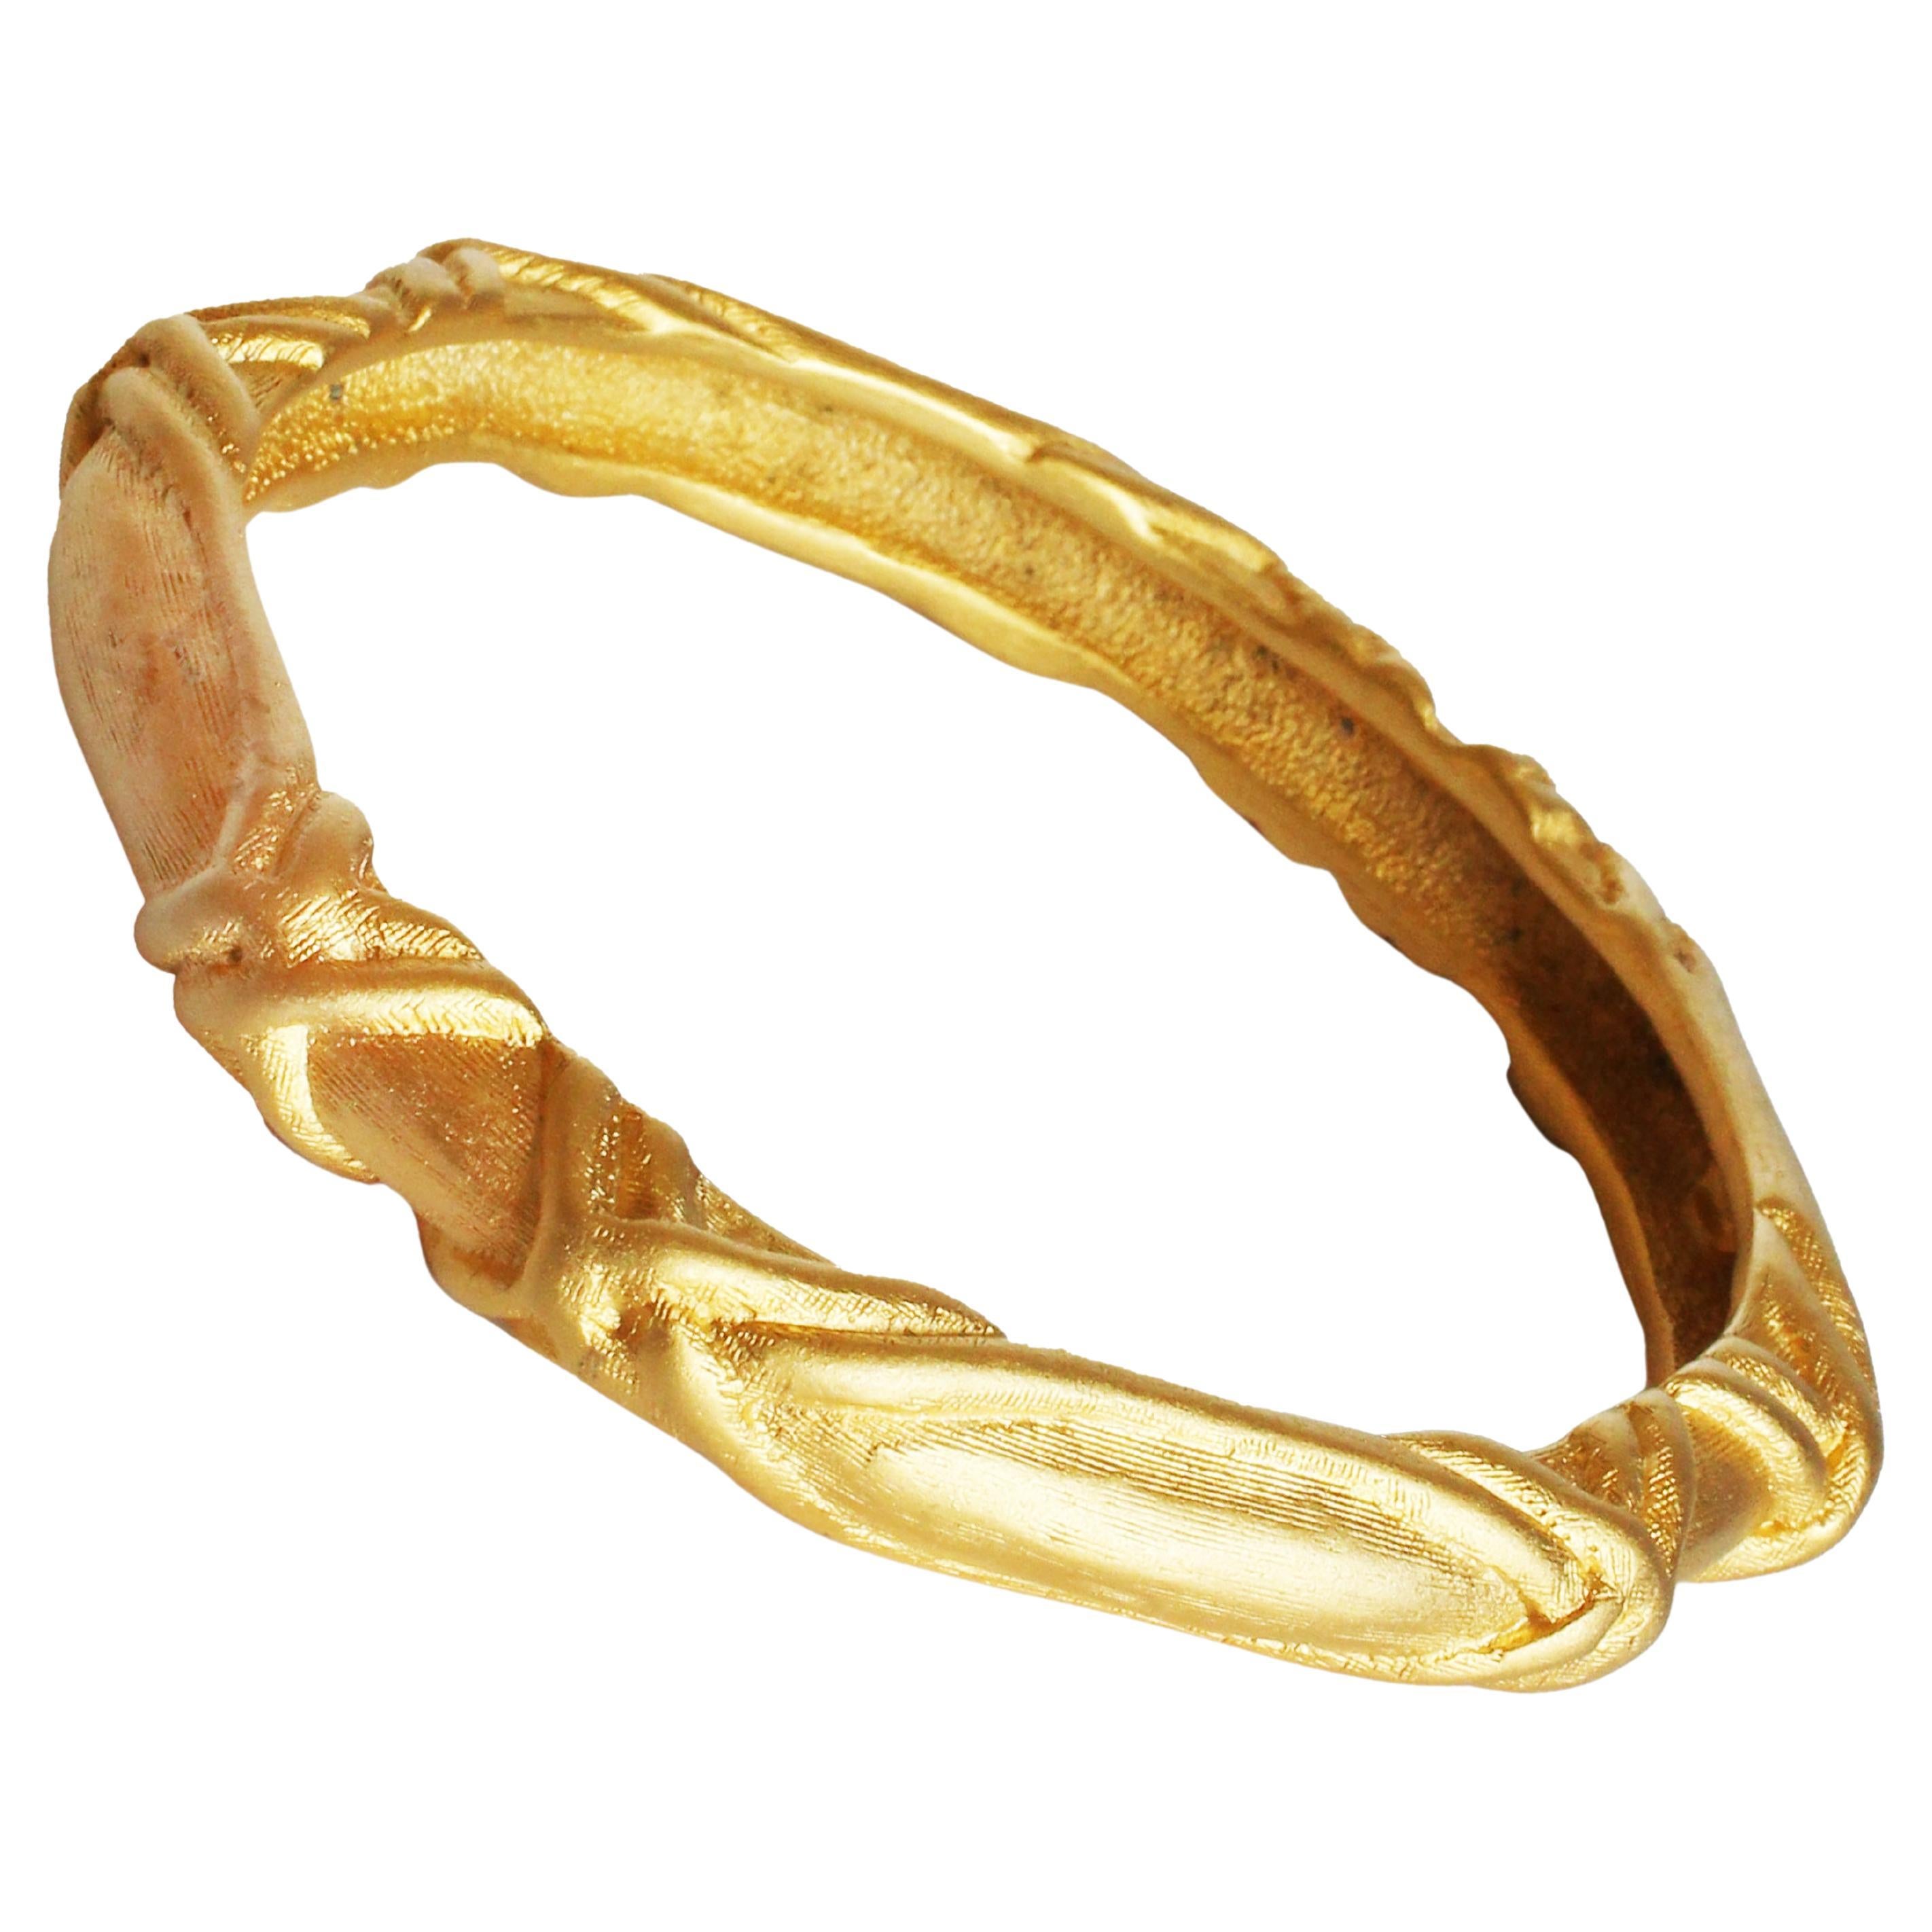 Givenchy Bracelet Bangle Gold Metal Textured Abstract Vintage 80s Jewelry 